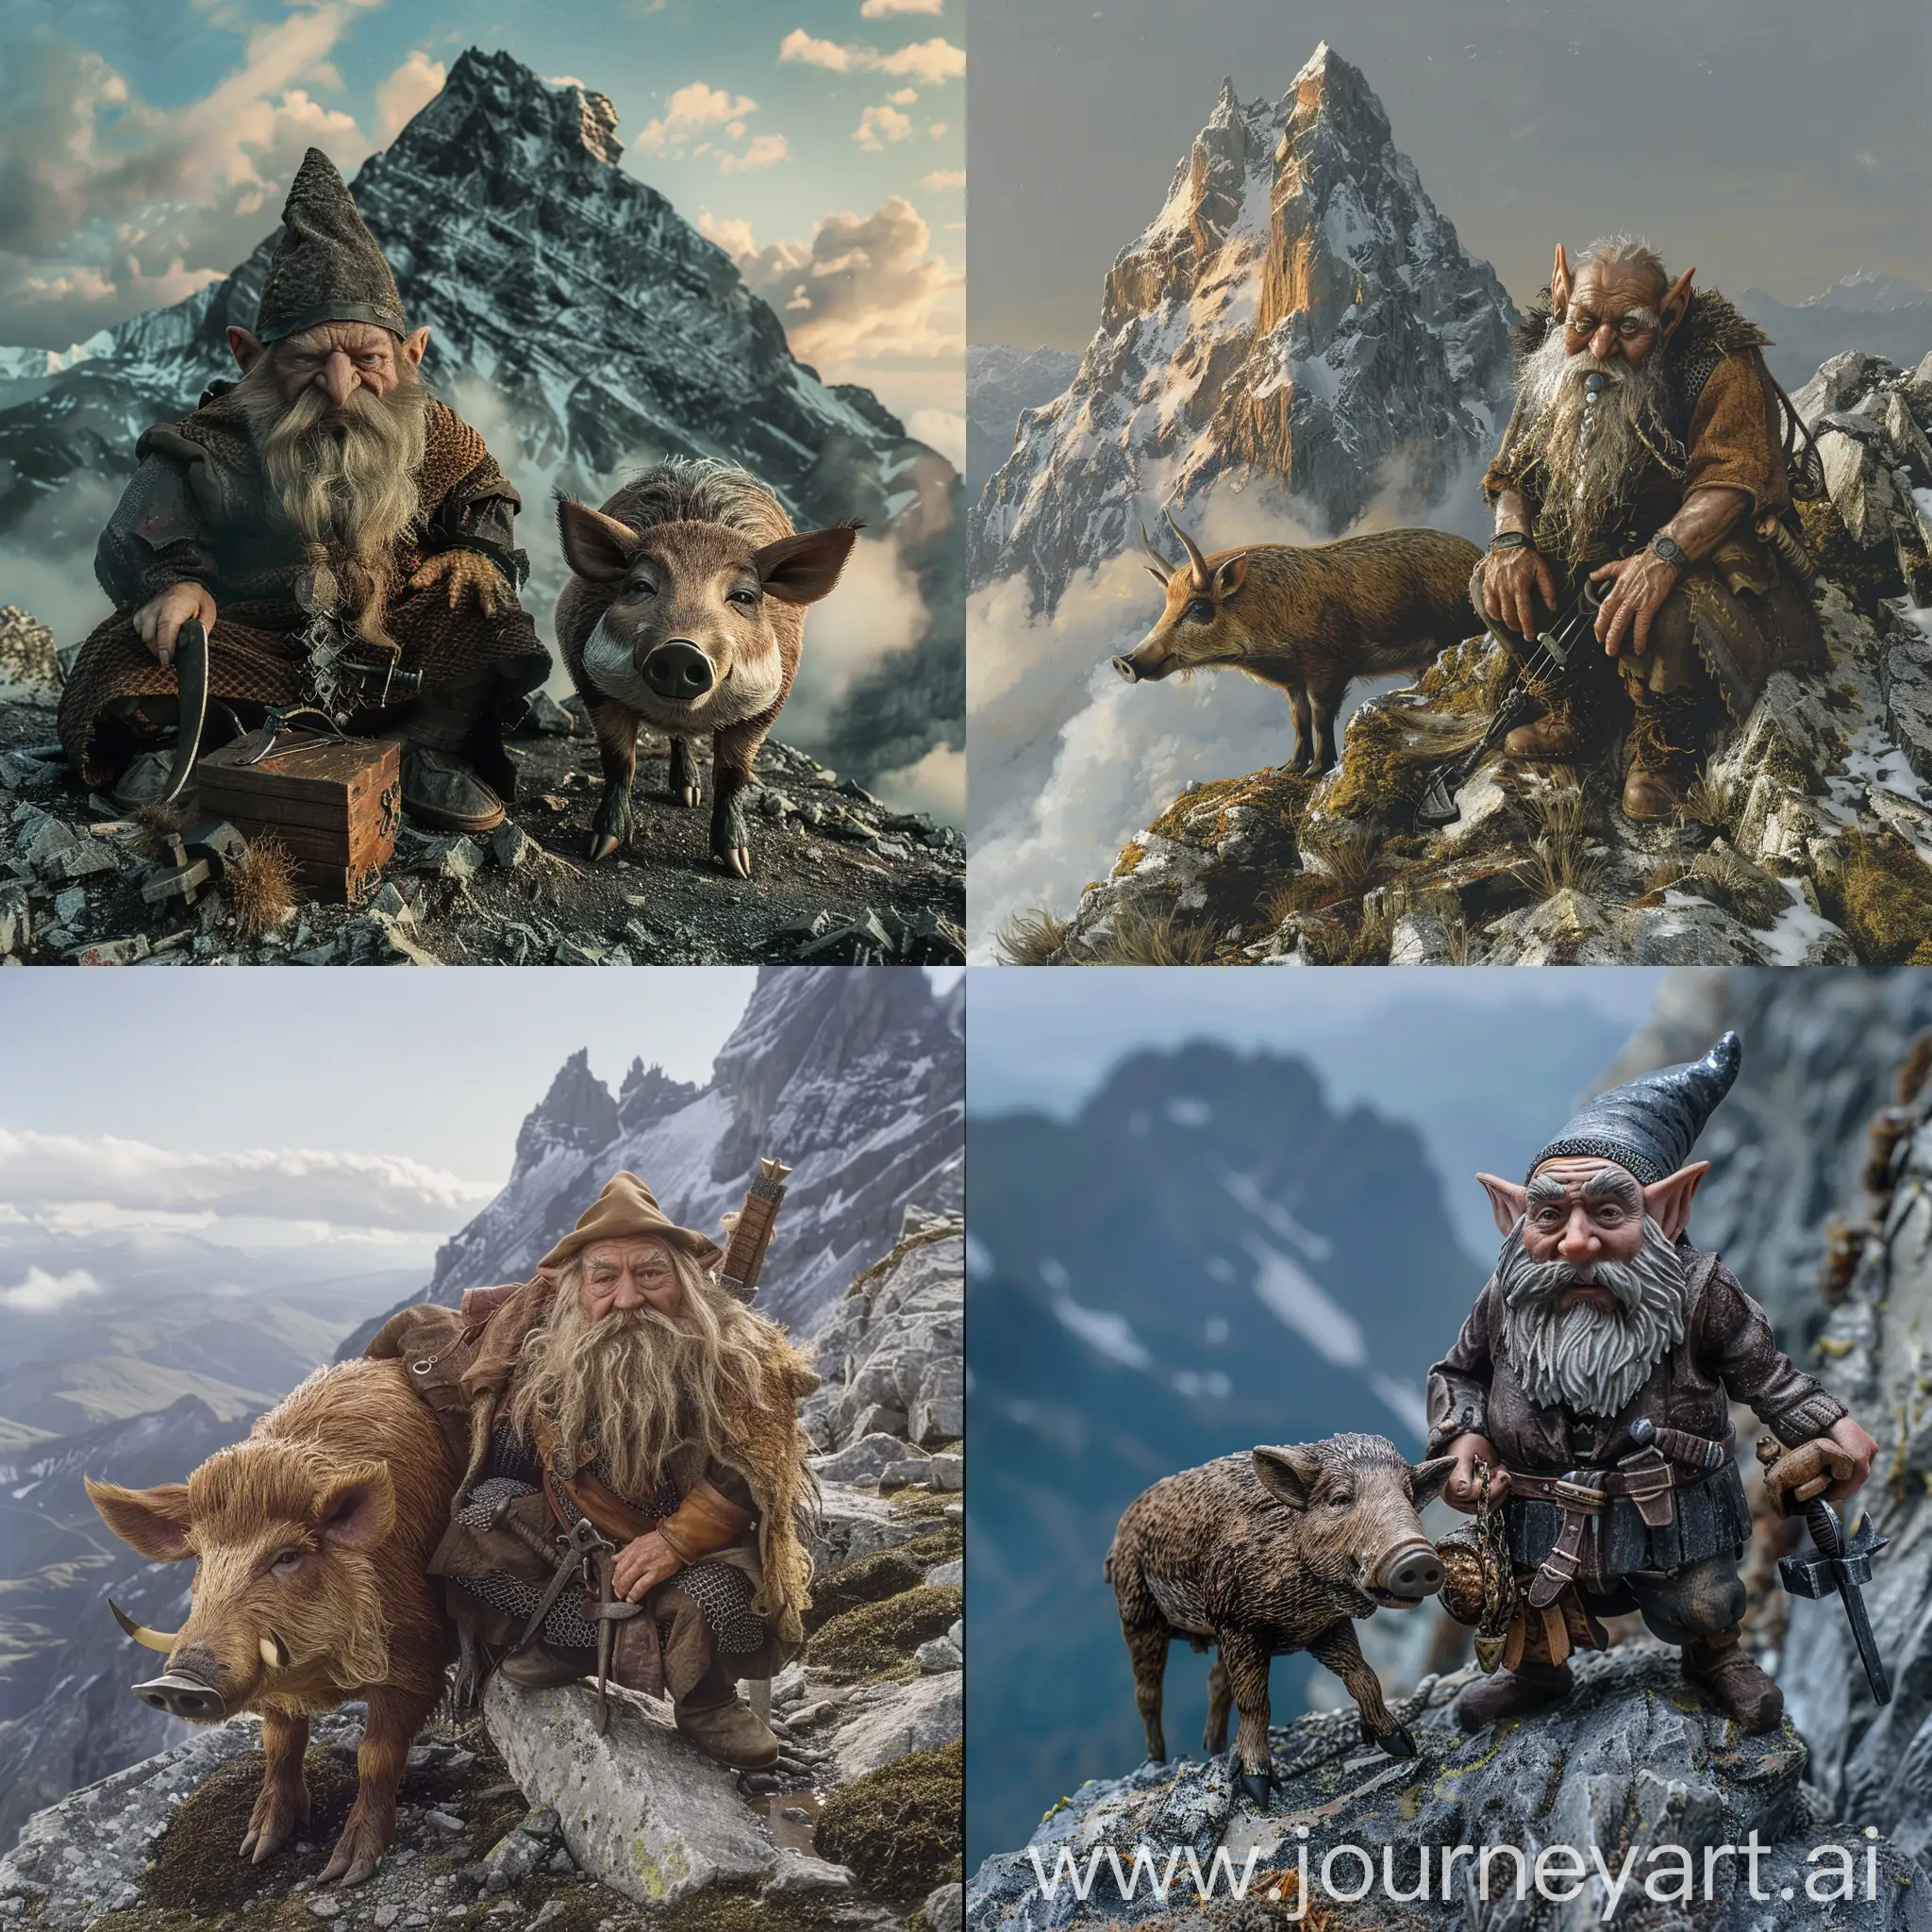 Dwarf-Blacksmith-with-Boar-on-Mountain-Lord-of-the-Rings-Fantasy-Art